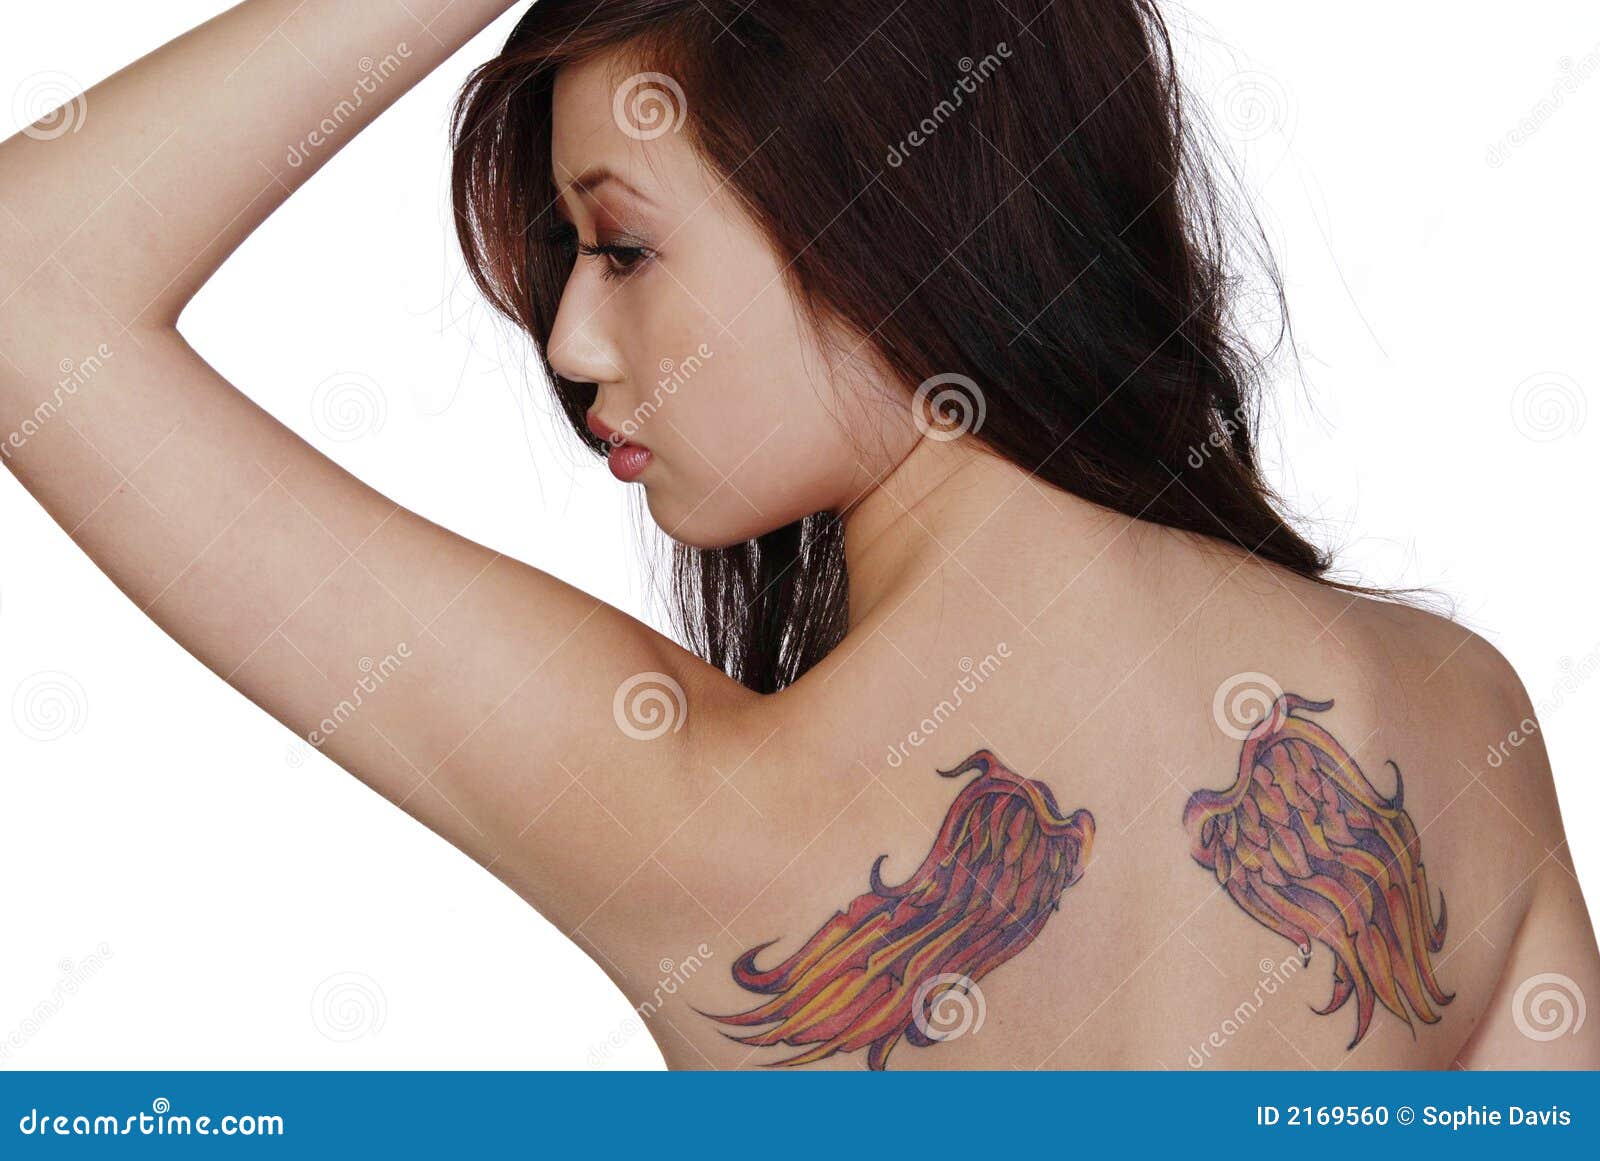 Eagle Tattoo 6 Sheets Temporary Tattoos Pair of Spread Out Eagle Bird or  Angel Wing Temporary tattoo Neck Arm Chest for Women Men Adults